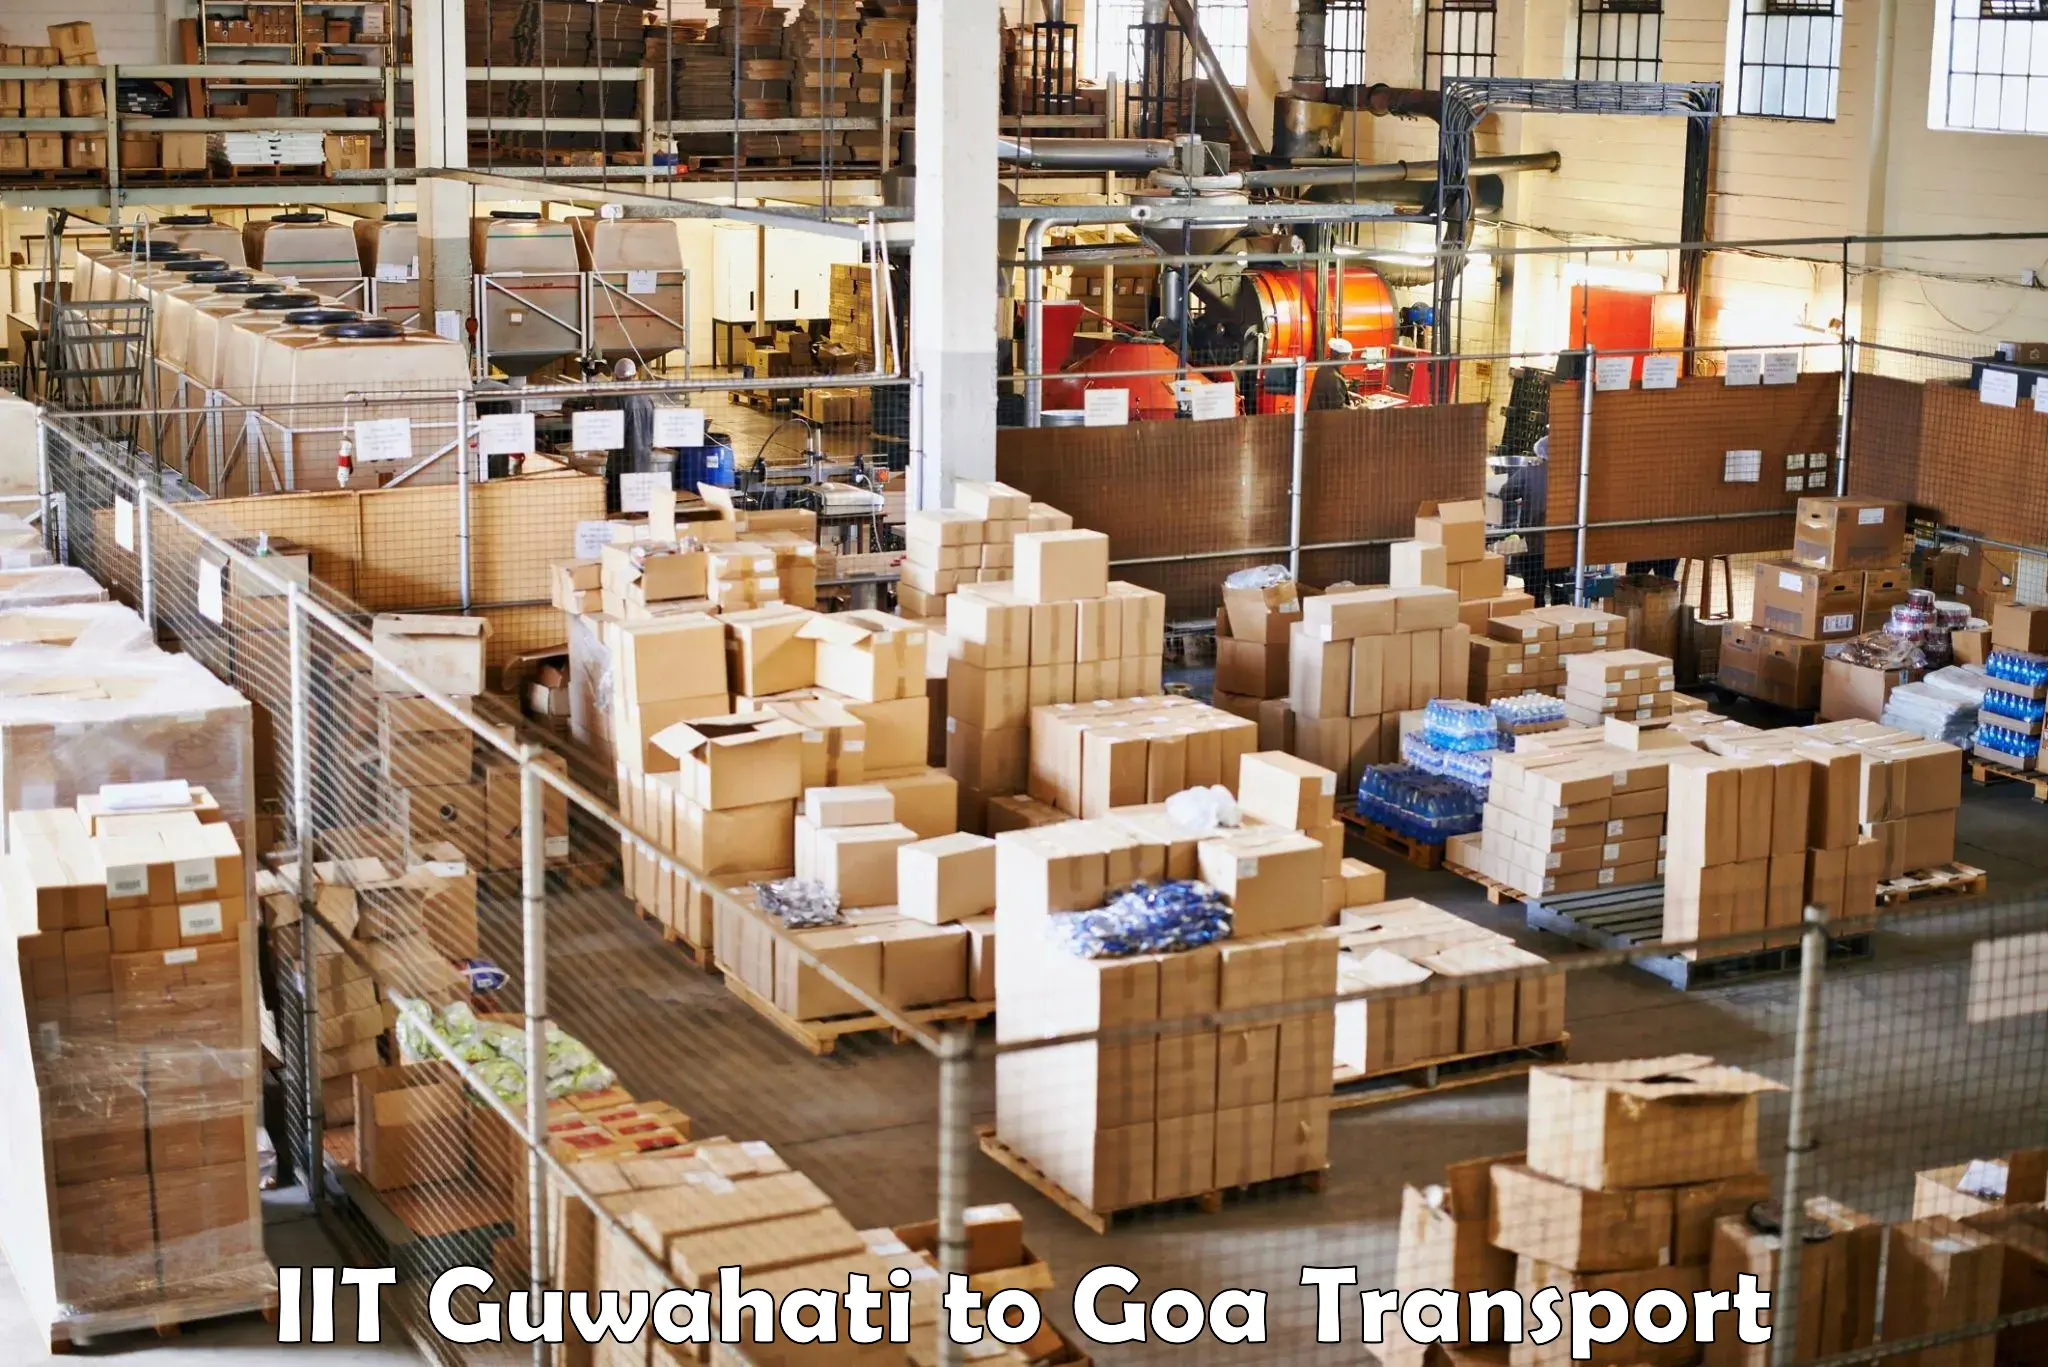 Commercial transport service IIT Guwahati to NIT Goa